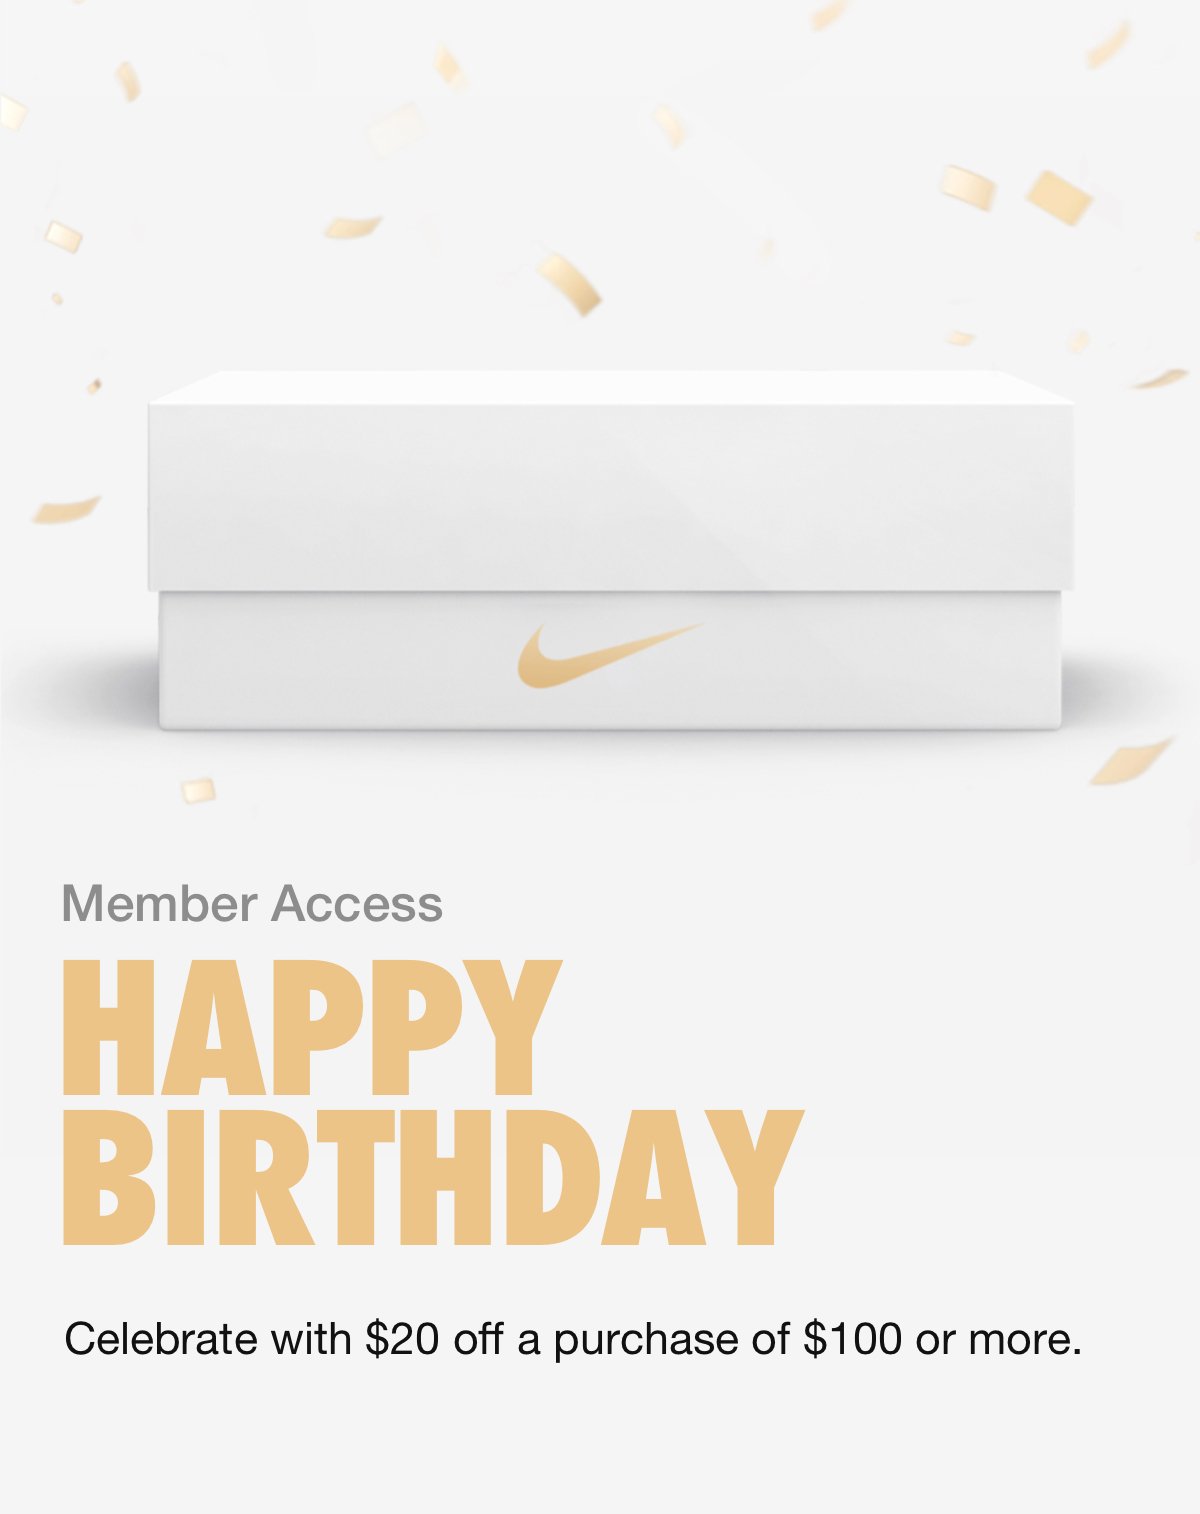 how to get my nike birthday discount